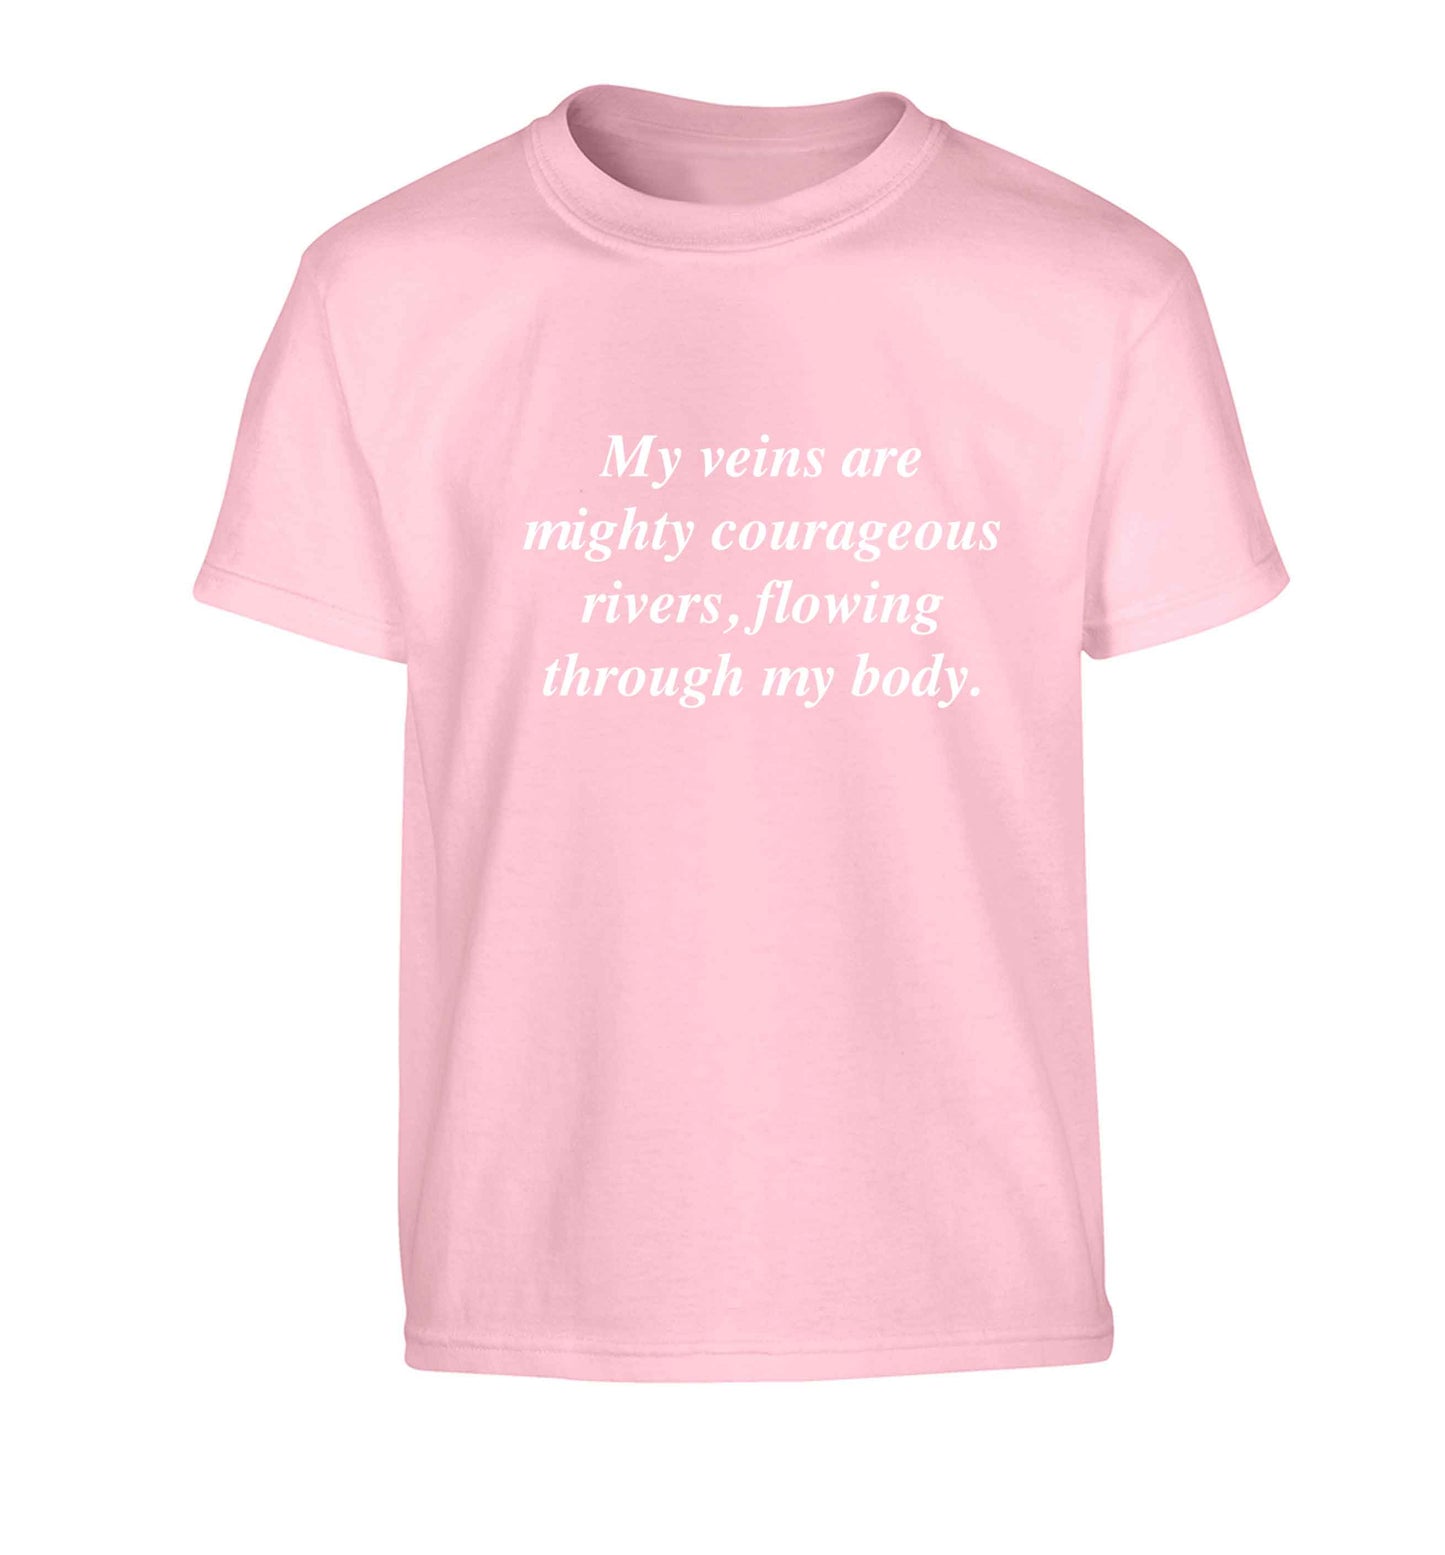 My veins are mighty courageous rivers, flowing through my body Children's light pink Tshirt 12-13 Years